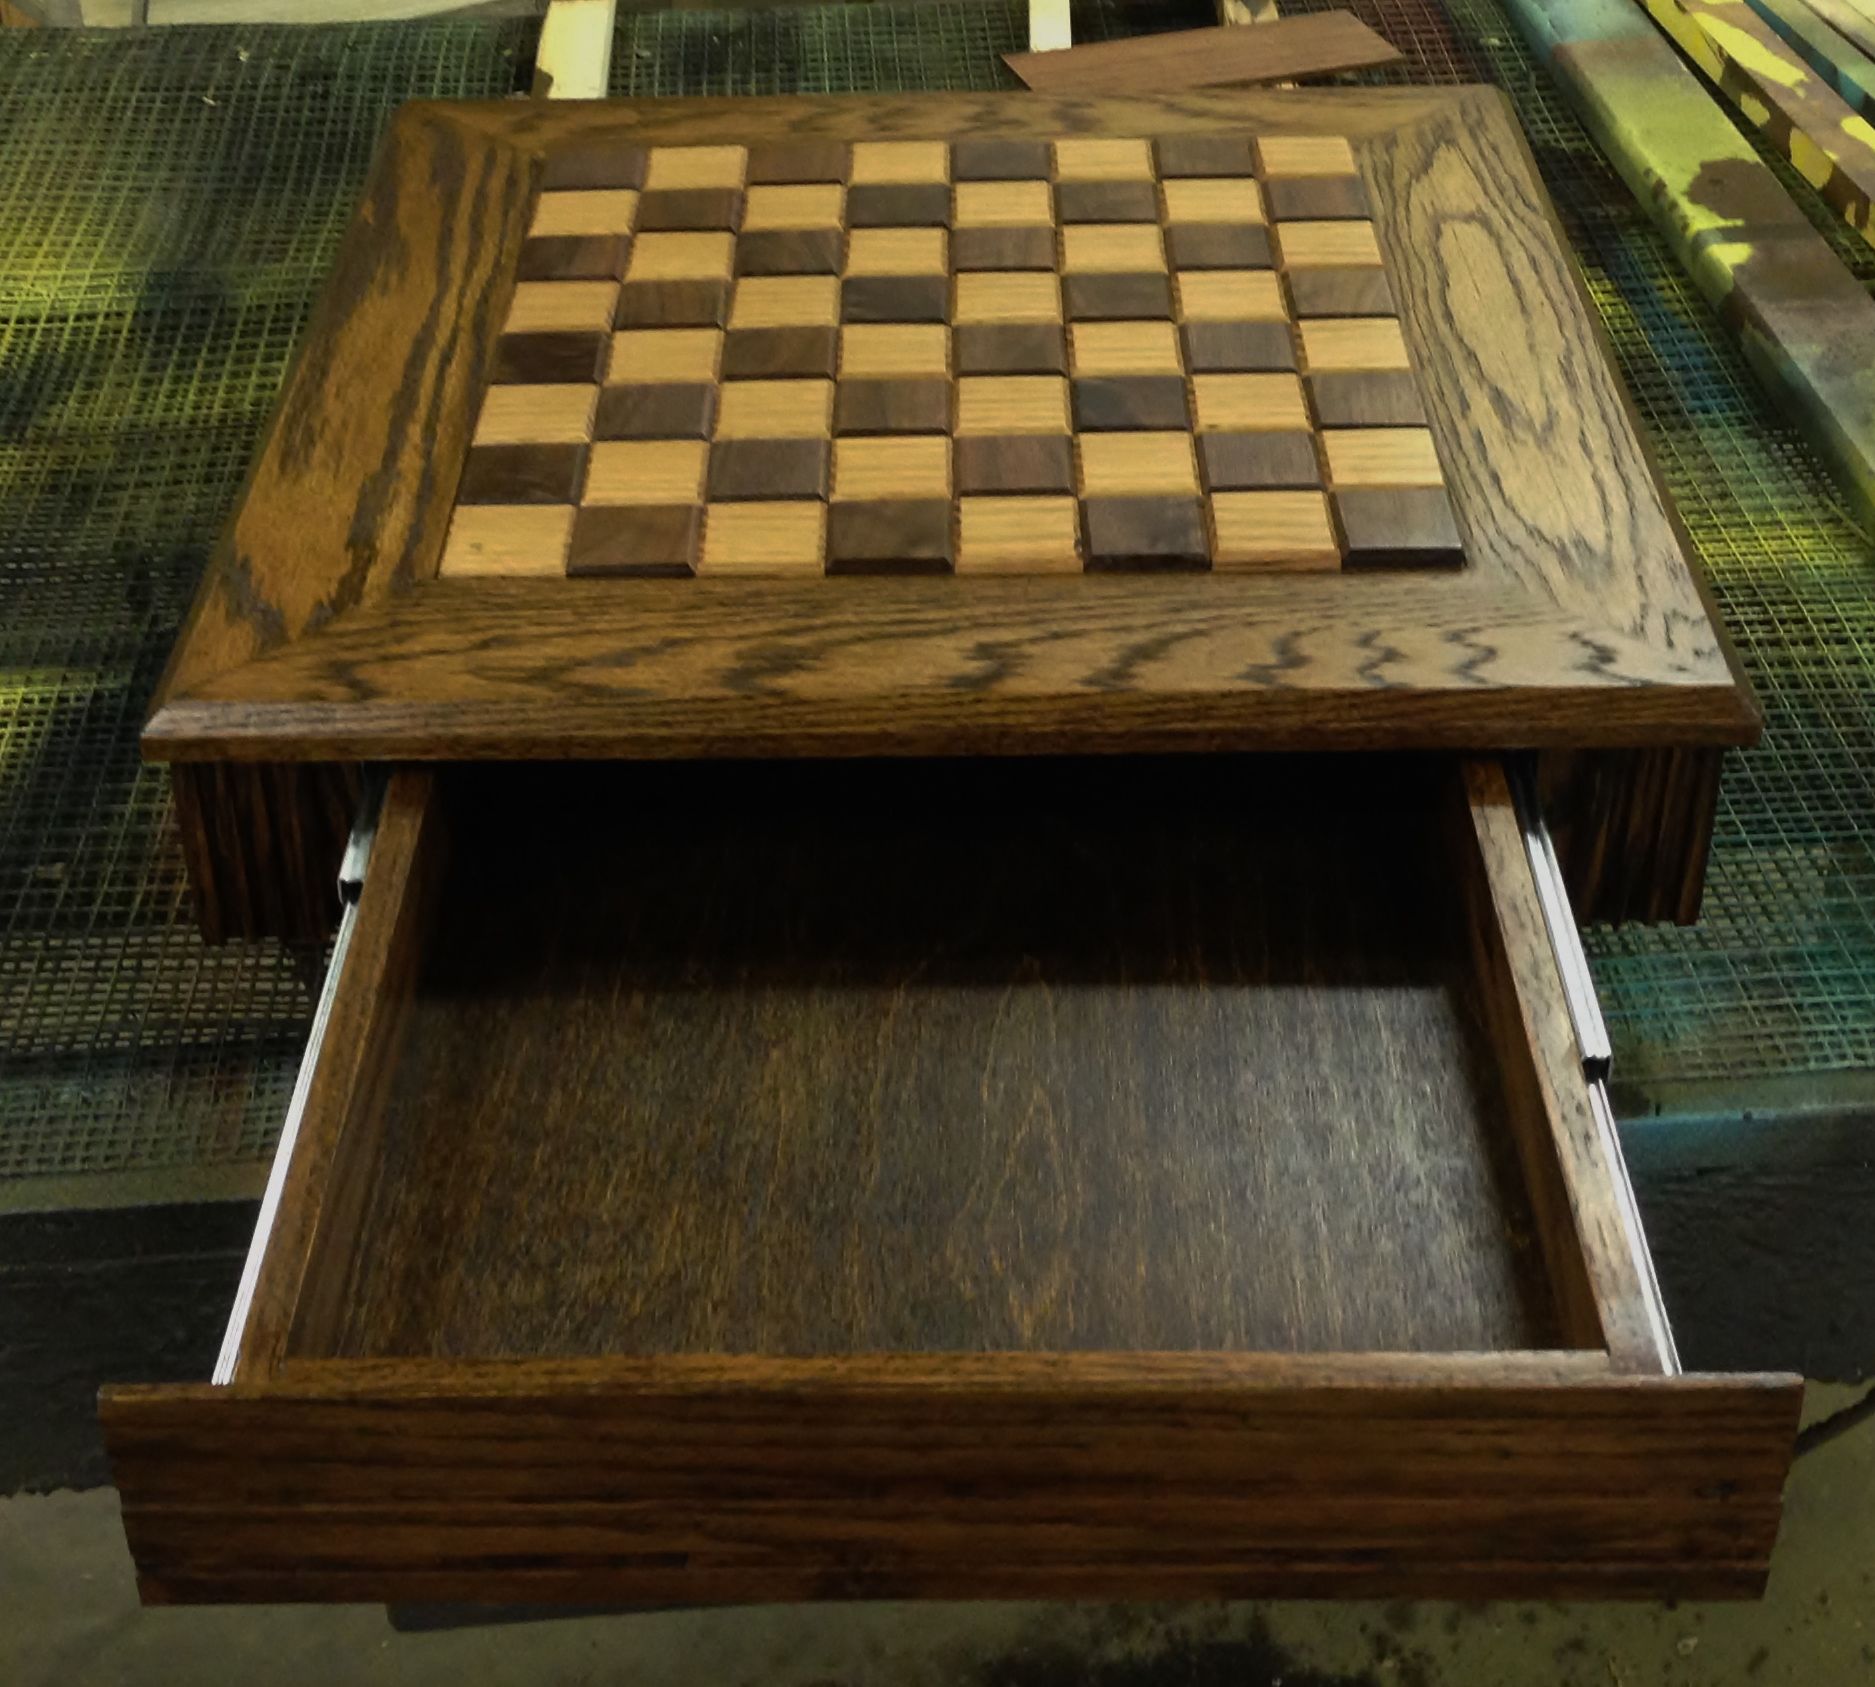 Olive Wooden Chess Set With Storage Custom Chess Board With 